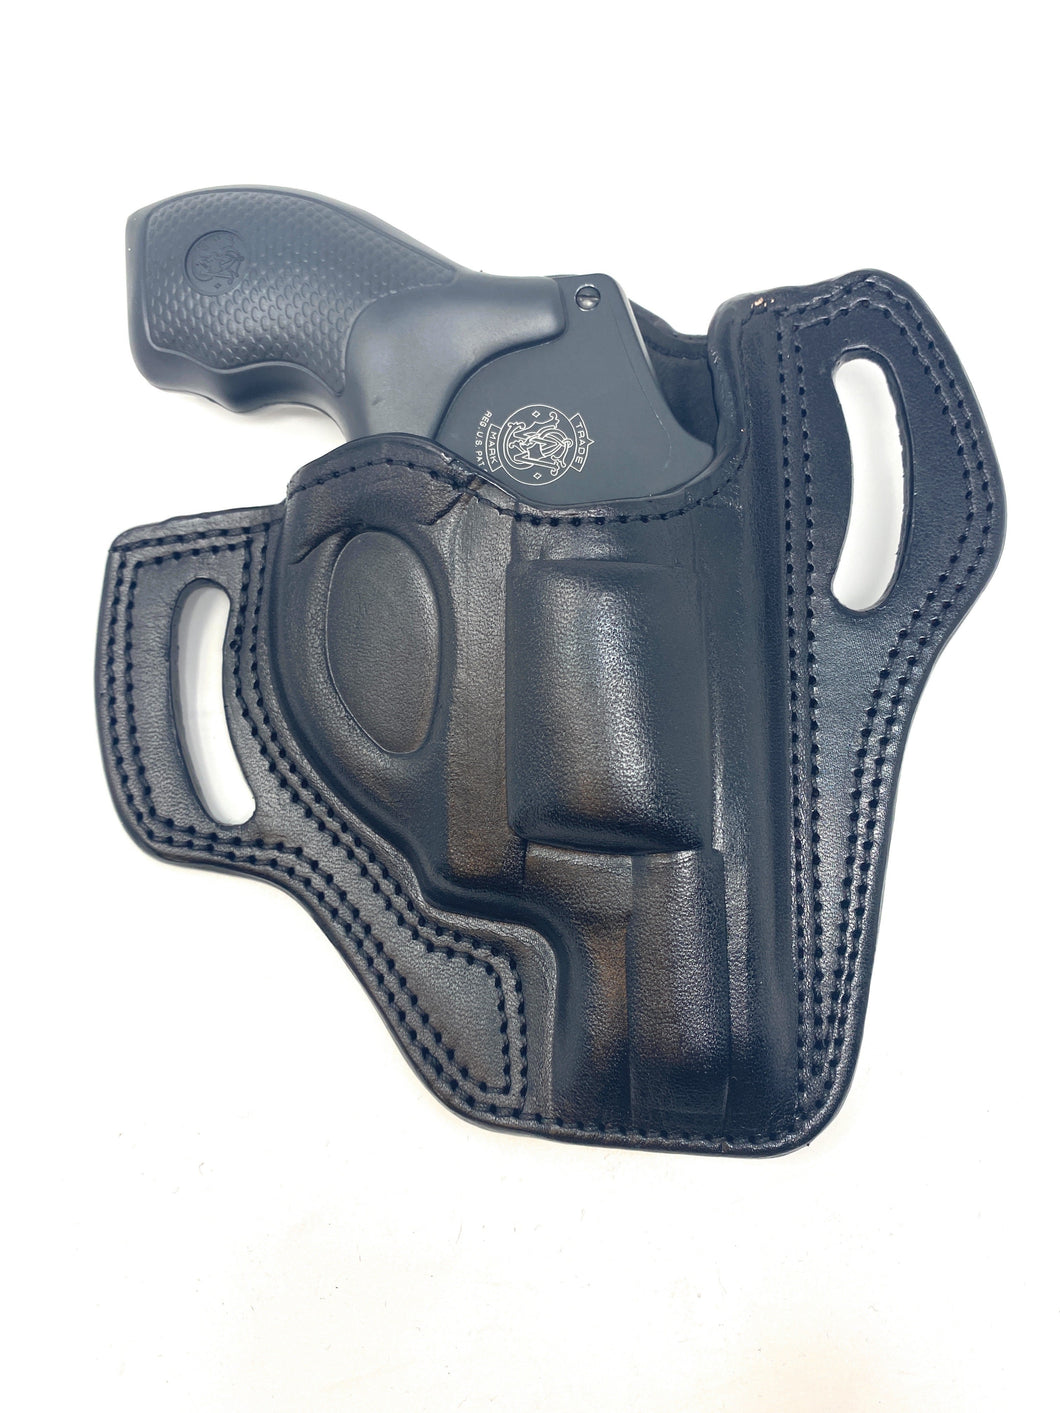 Cardini Two Slot OWB Pancake Holster for Snub Nose Revolvers - Clearance